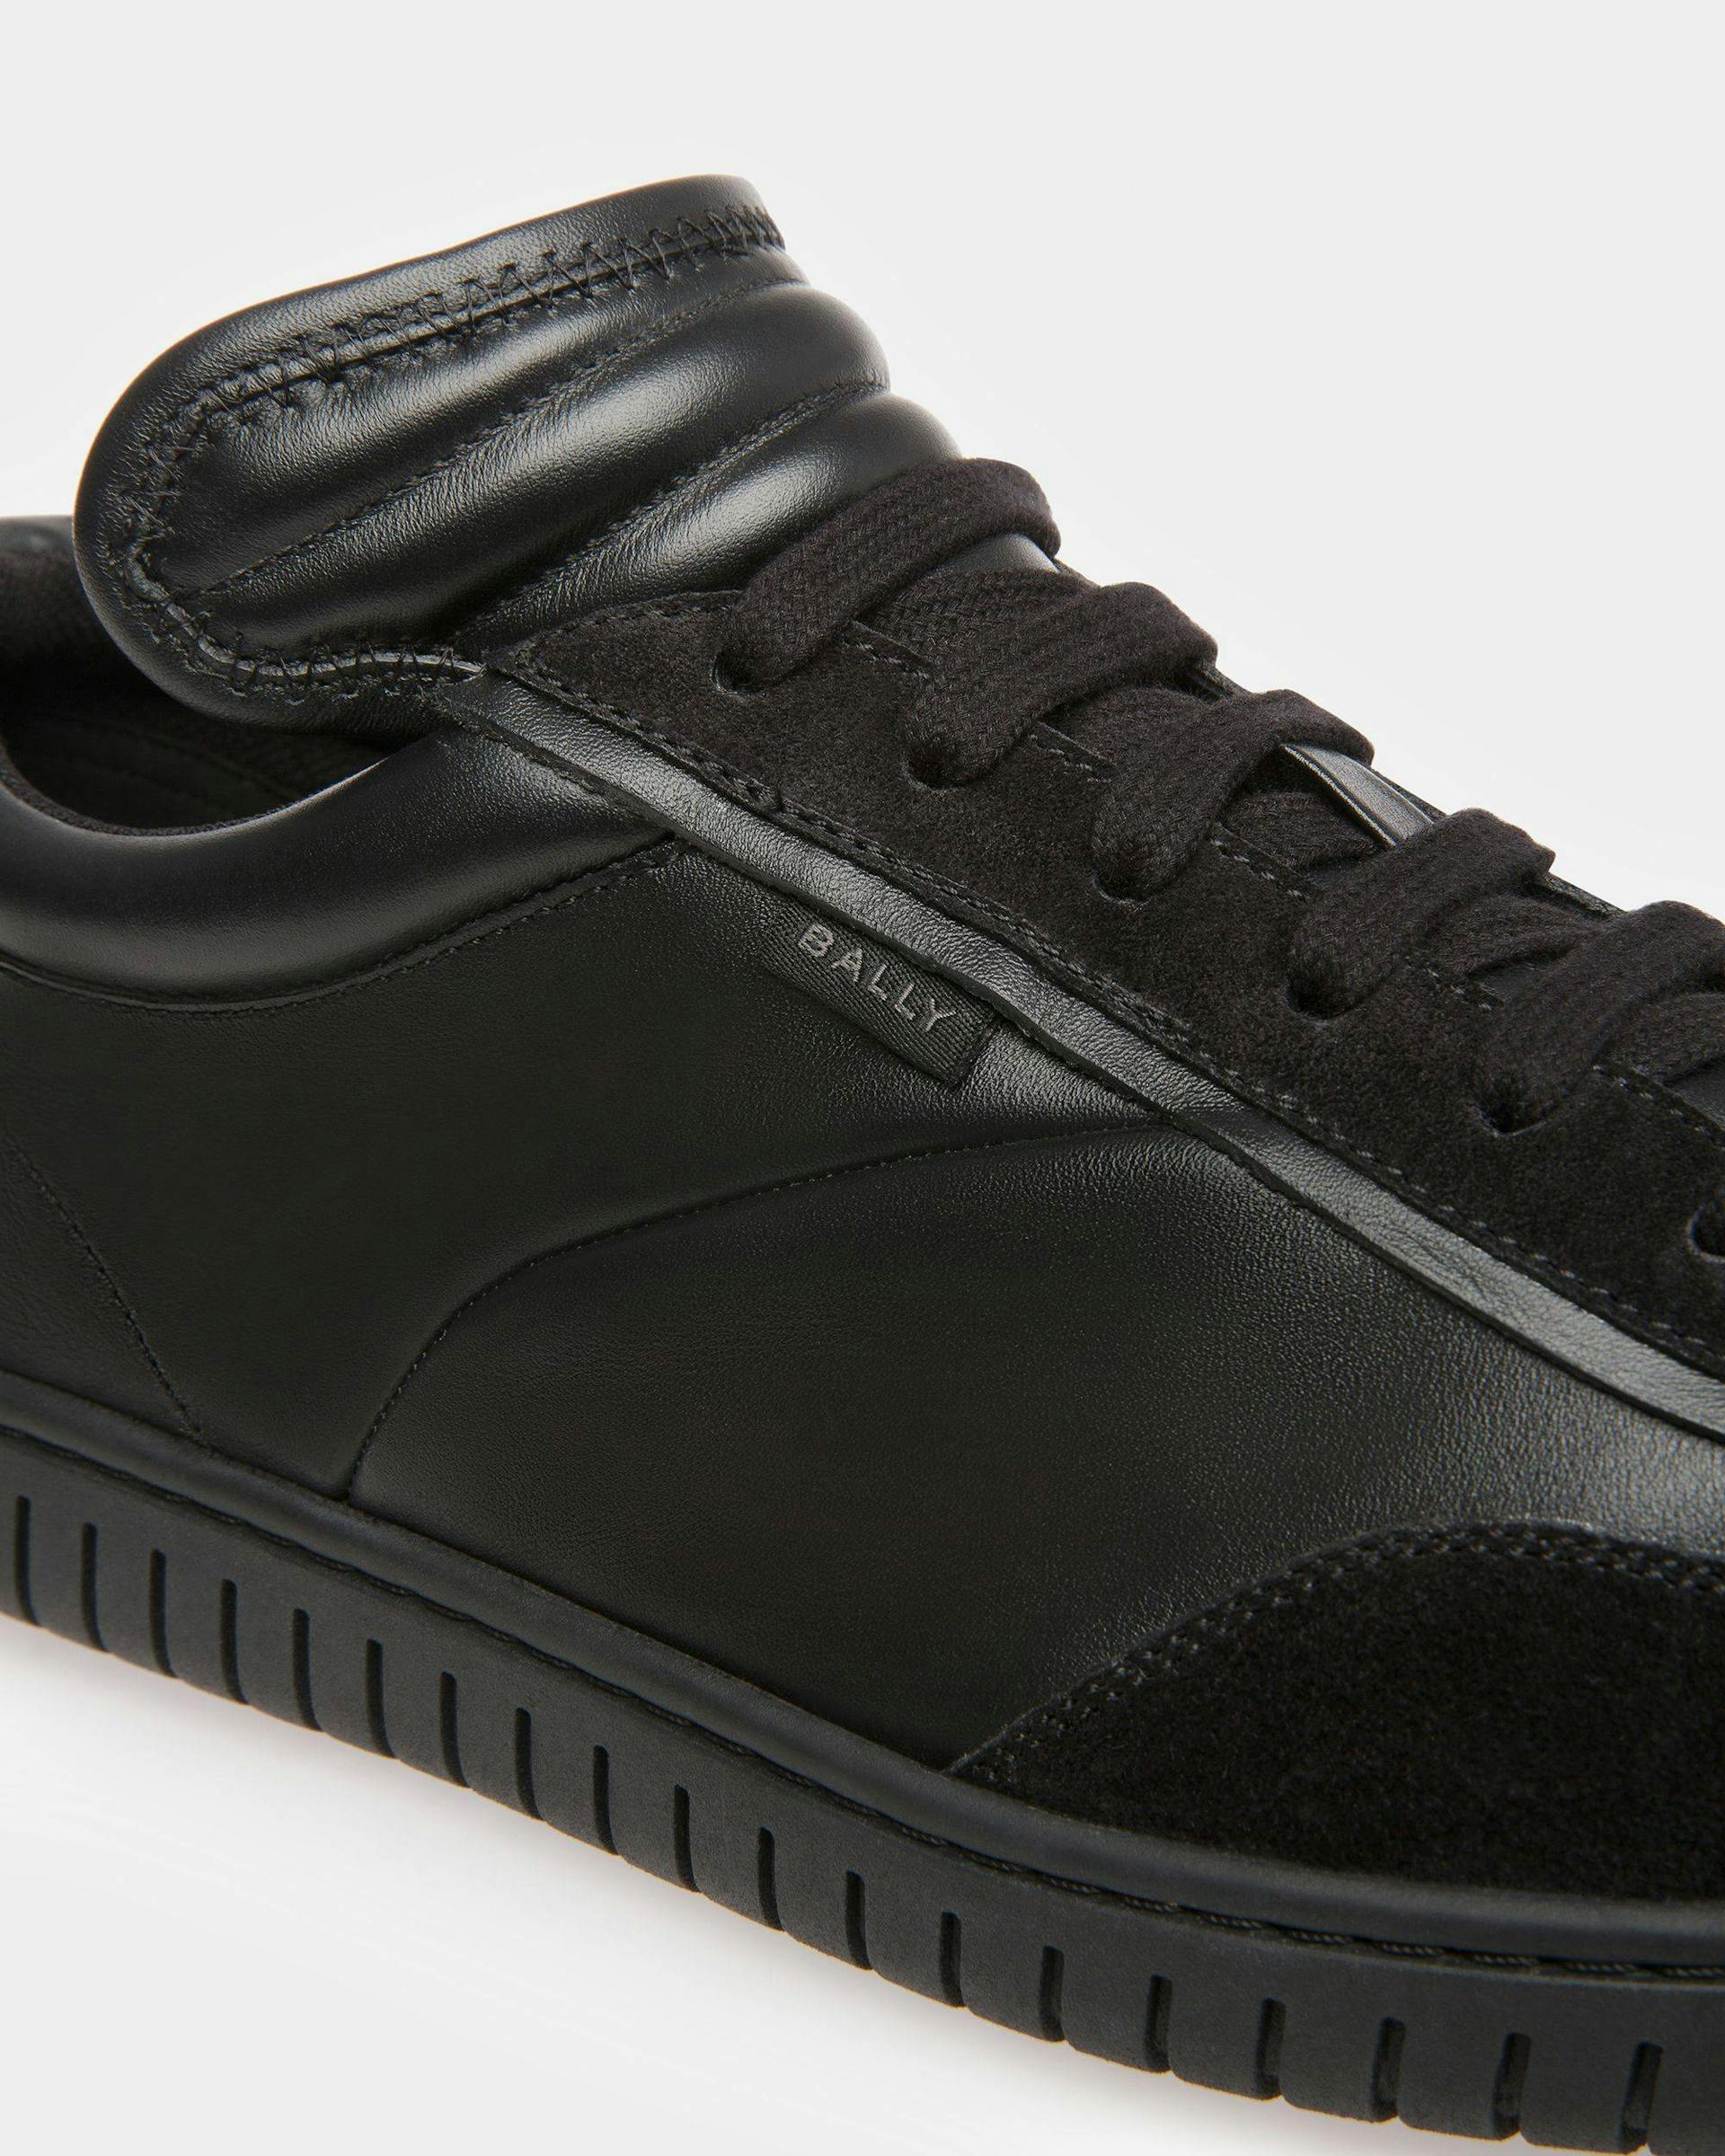 Men's Player Sneakers In Black Leather | Bally | Still Life Detail